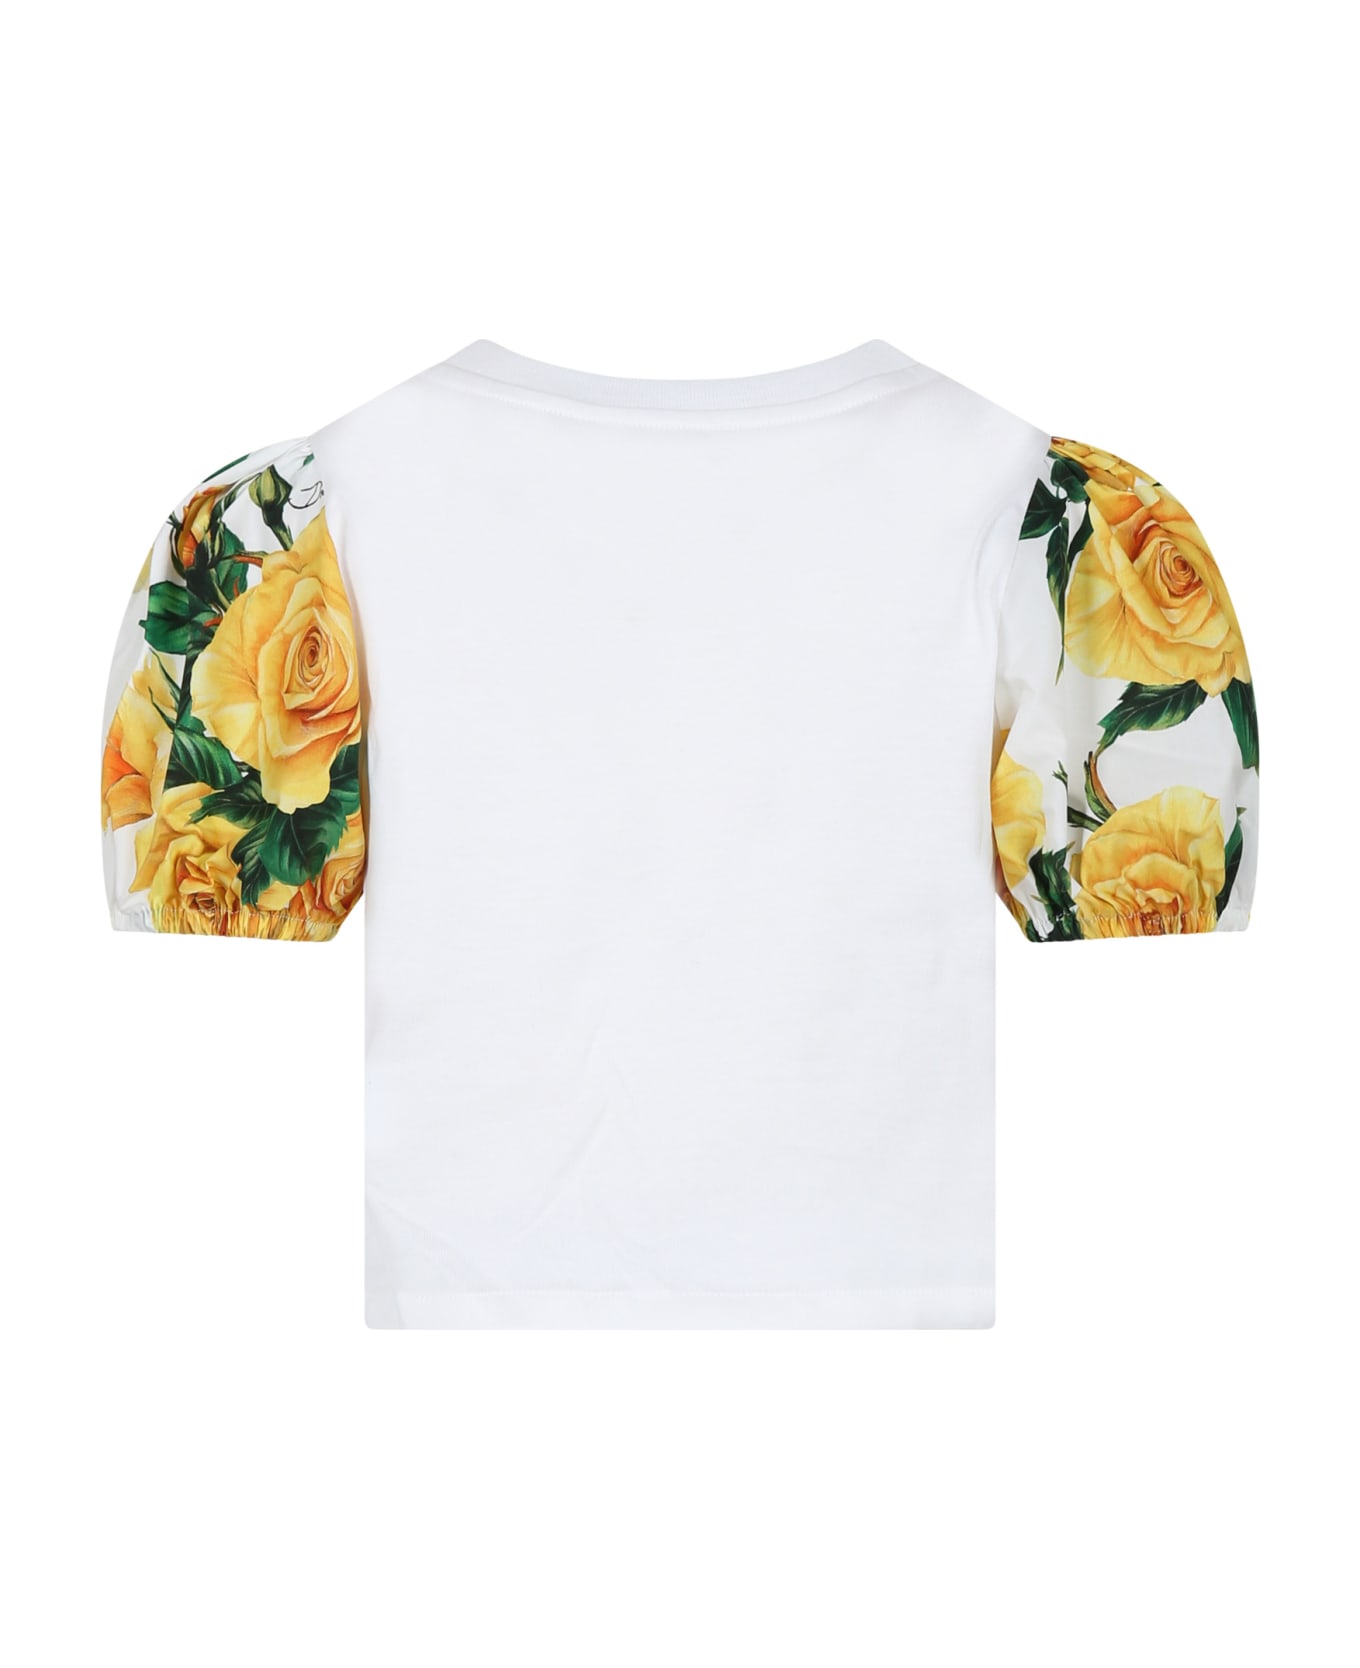 Dolce & Gabbana White T-shirt For Girl With Flowering Pattern - Giallo/bianco